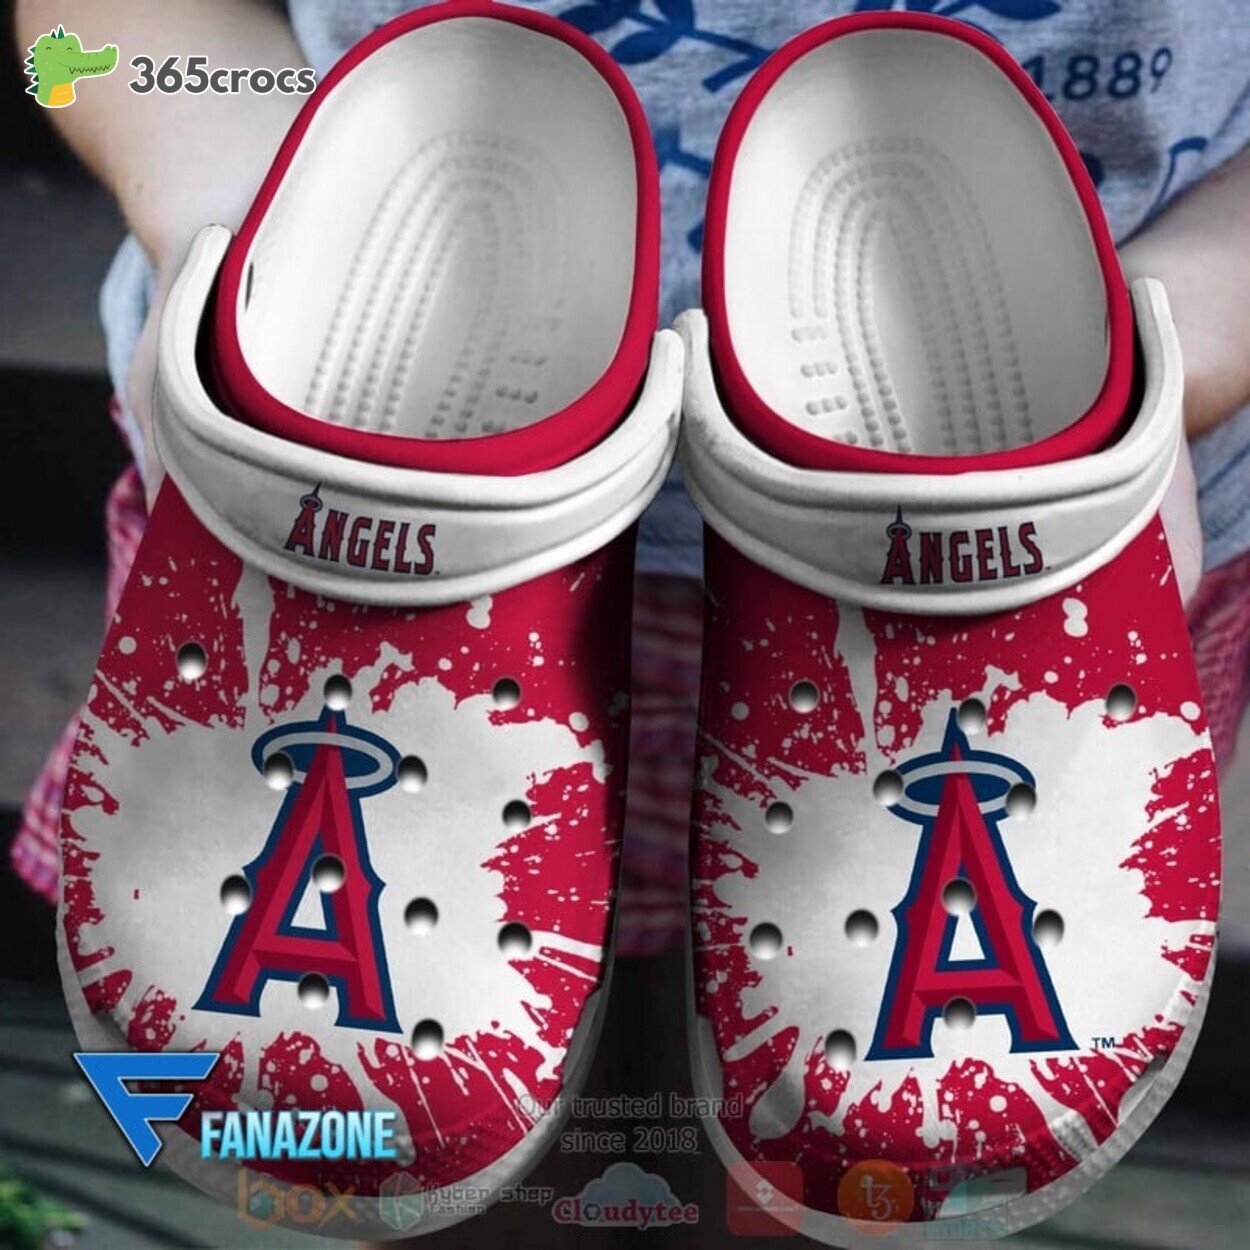 Los Angeles Angels MLB Sport Crocss Clogs Shoes Comfortable